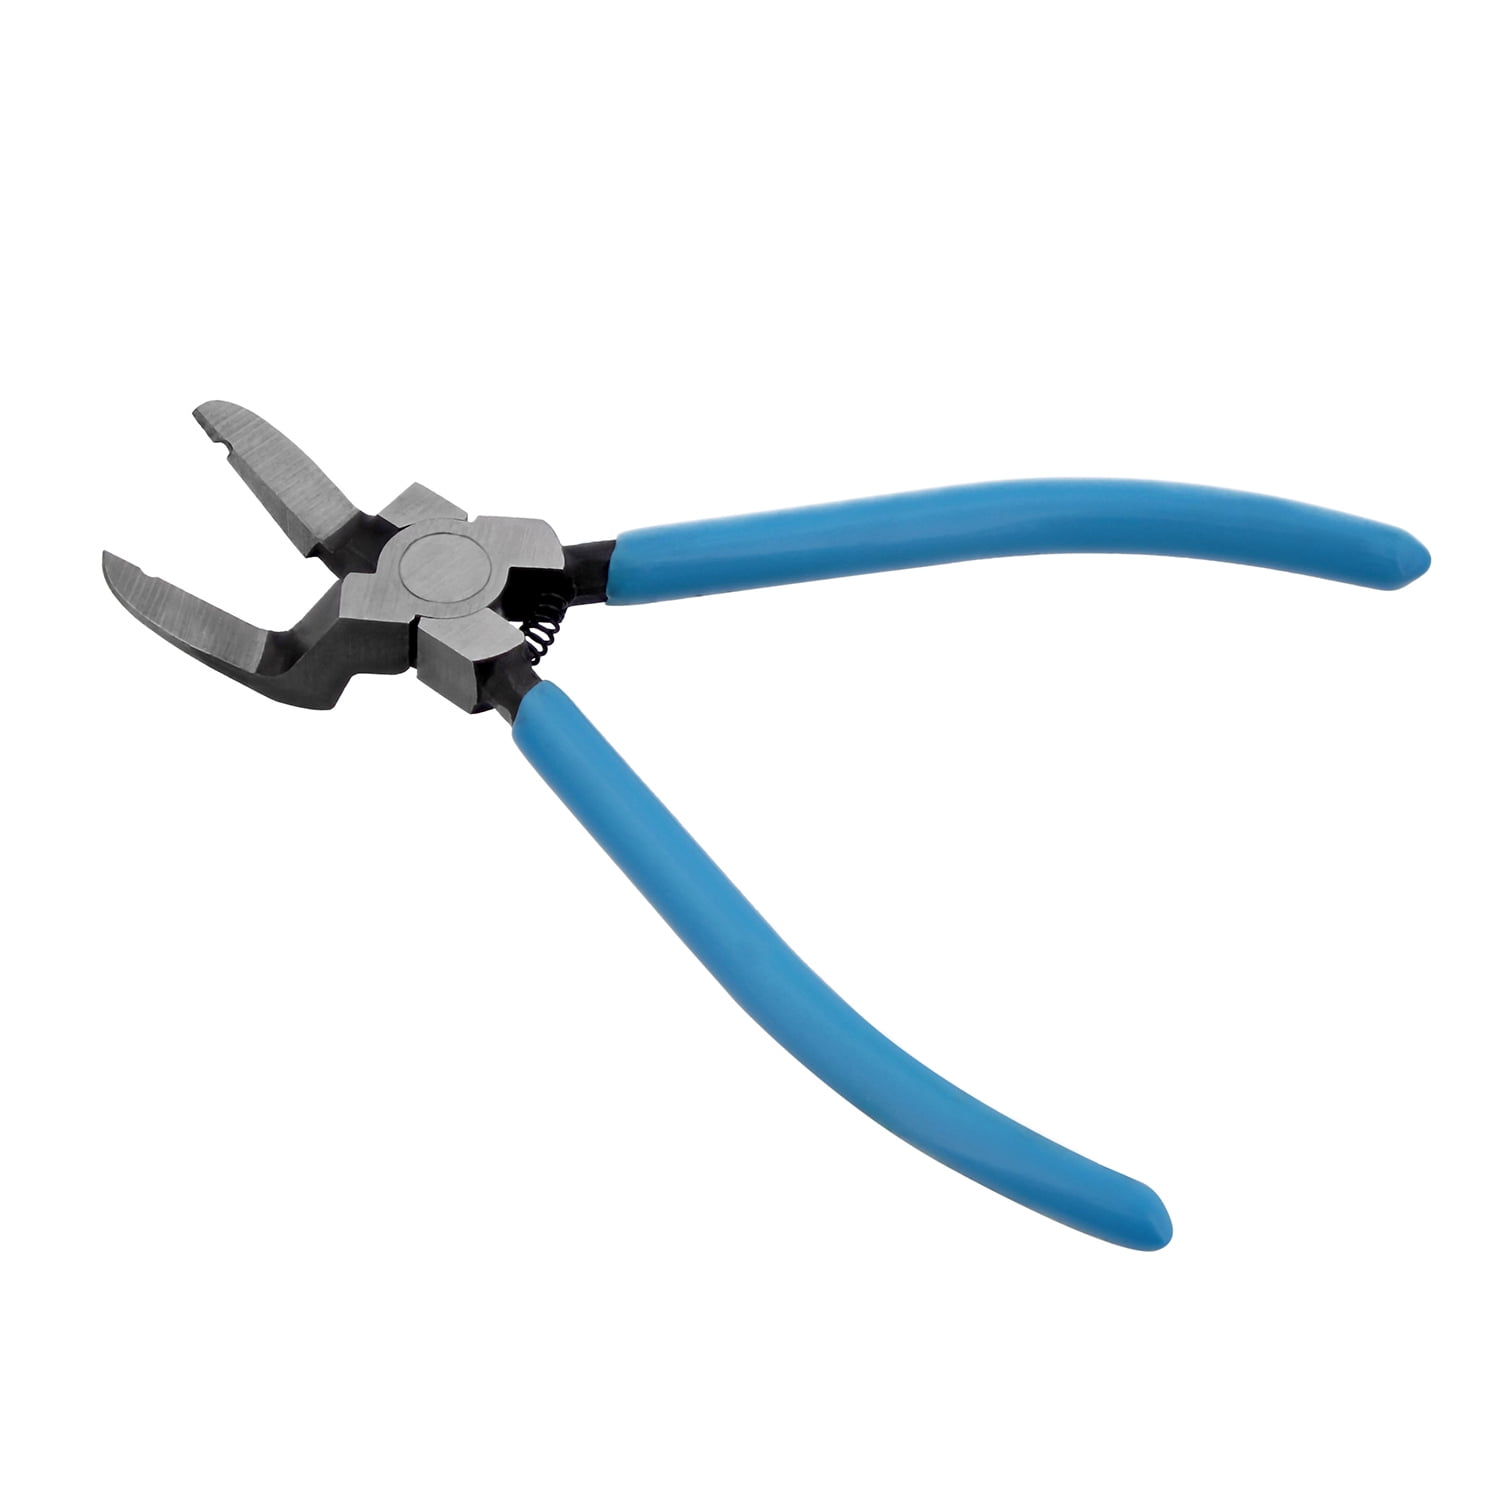 Miniature wire cutter and strand trimming tool (Flush Cut)